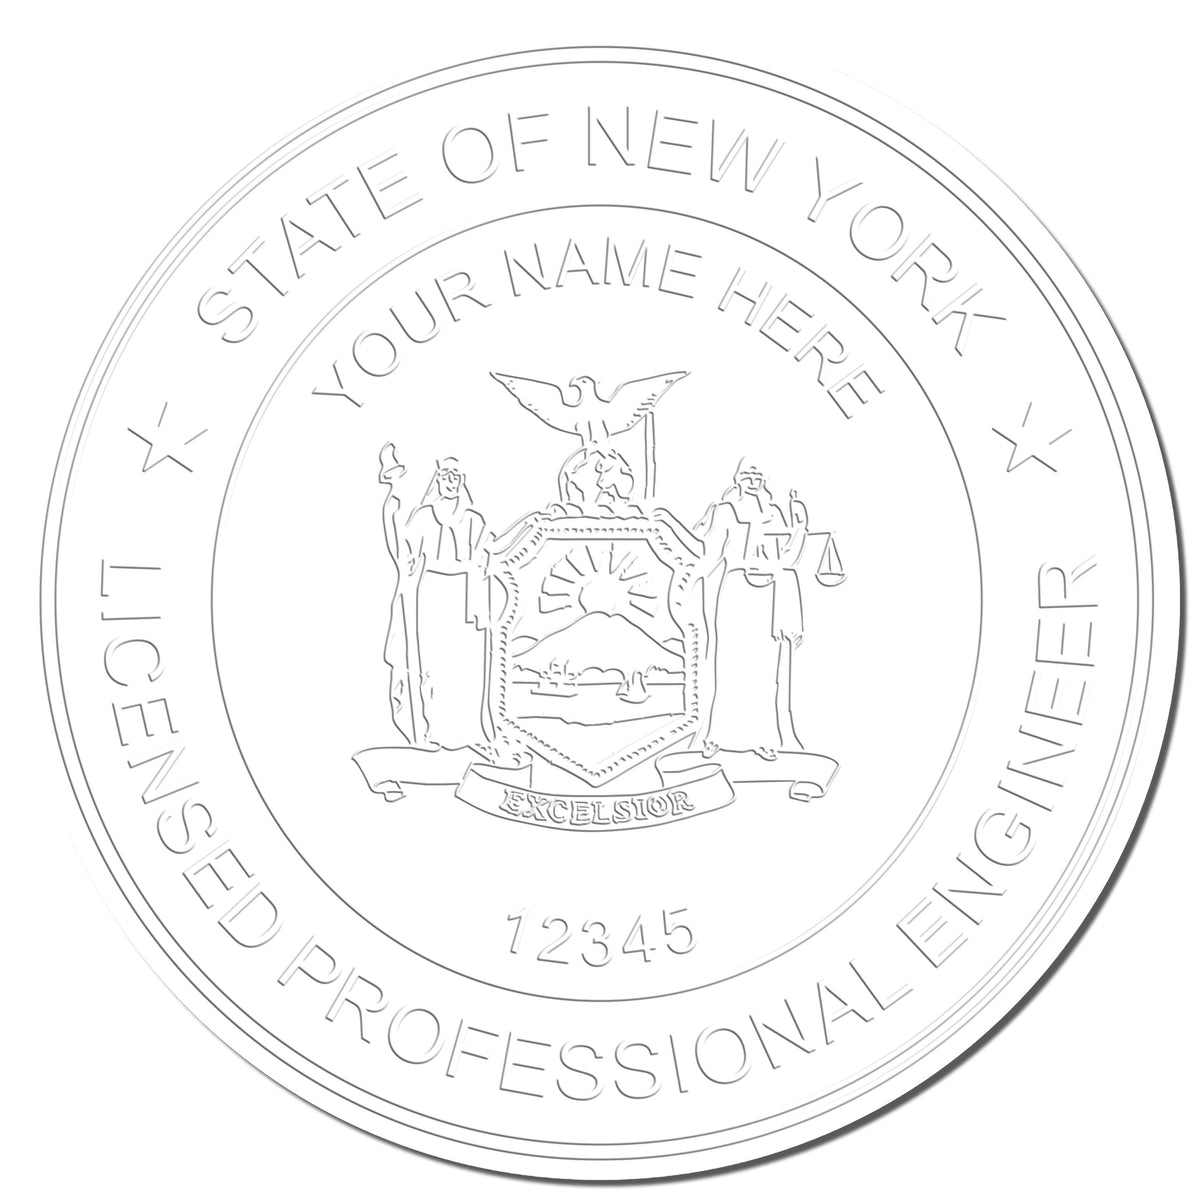 The Soft New York Professional Engineer Seal stamp impression comes to life with a crisp, detailed photo on paper - showcasing true professional quality.